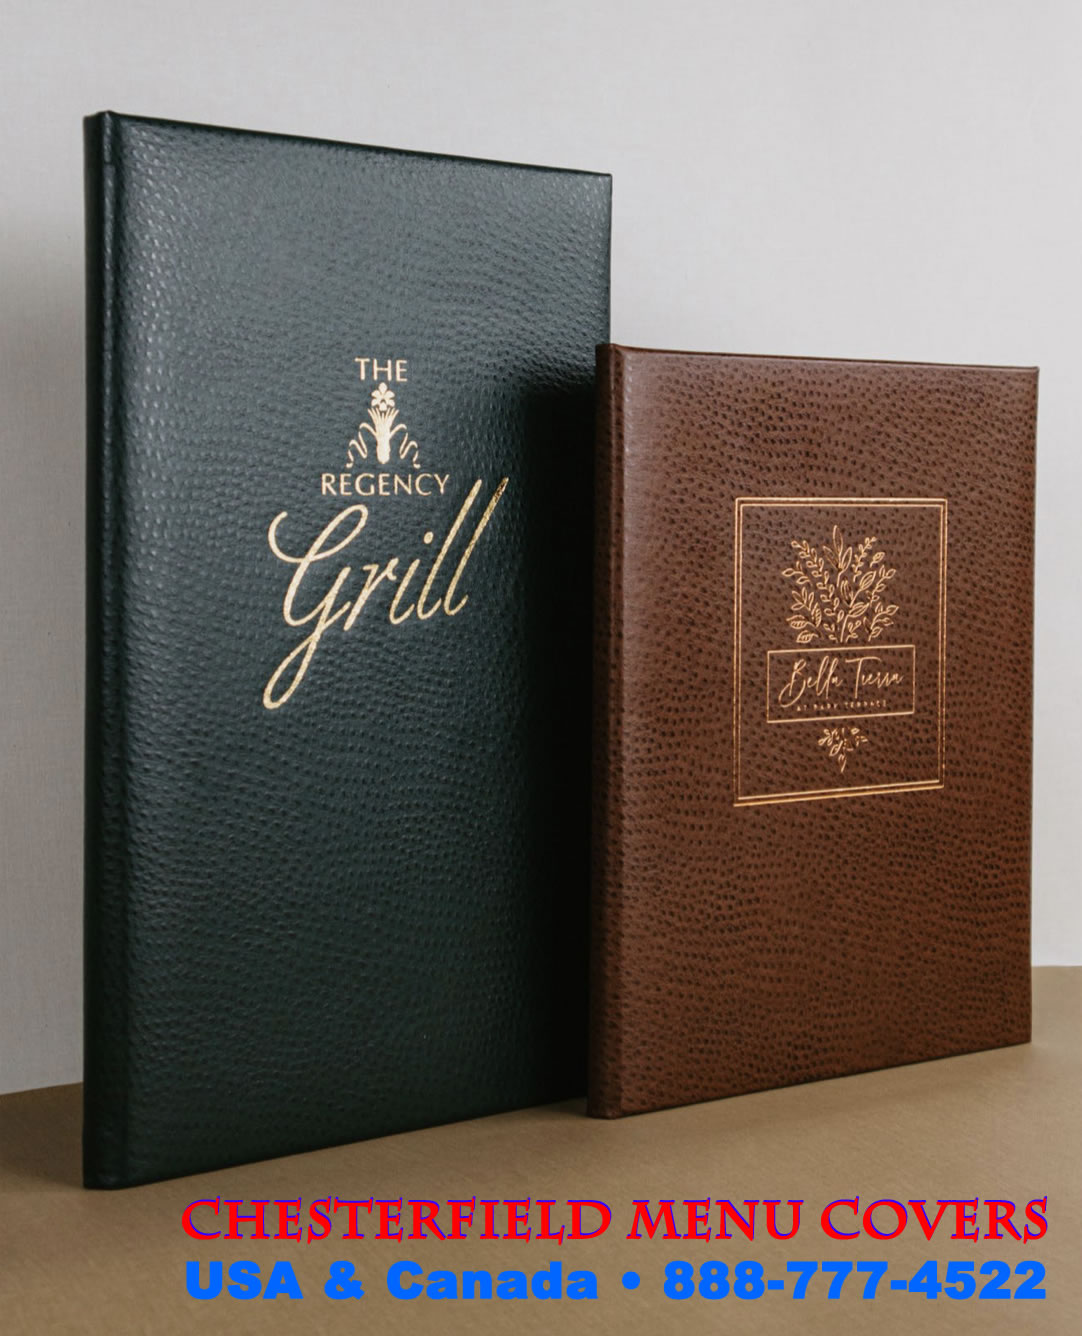 Chesterfield Menu Covers - Always Ask For MenuCoverMan.com to bet the job done right... and fast!!